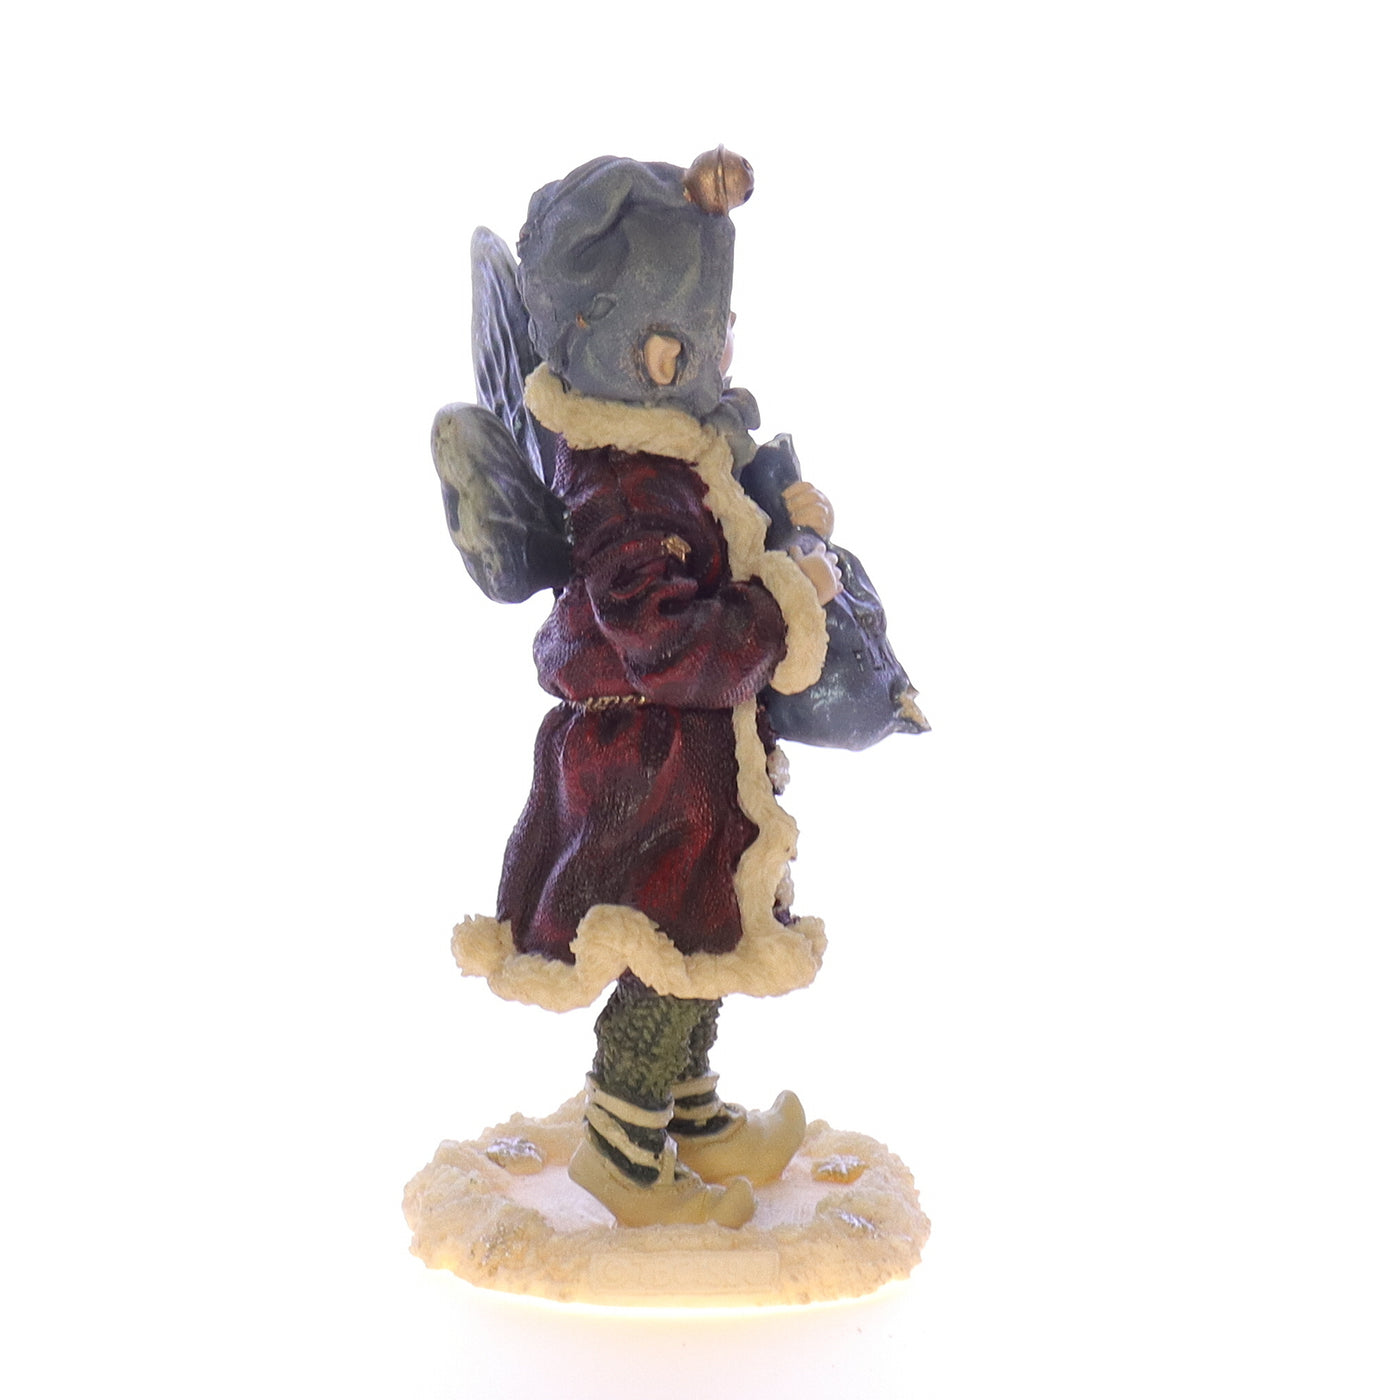 The_Wee_Folkstone_Collection_36002_Kristabell_Faeriefrost_Christmas_Figurine_1997 Right View